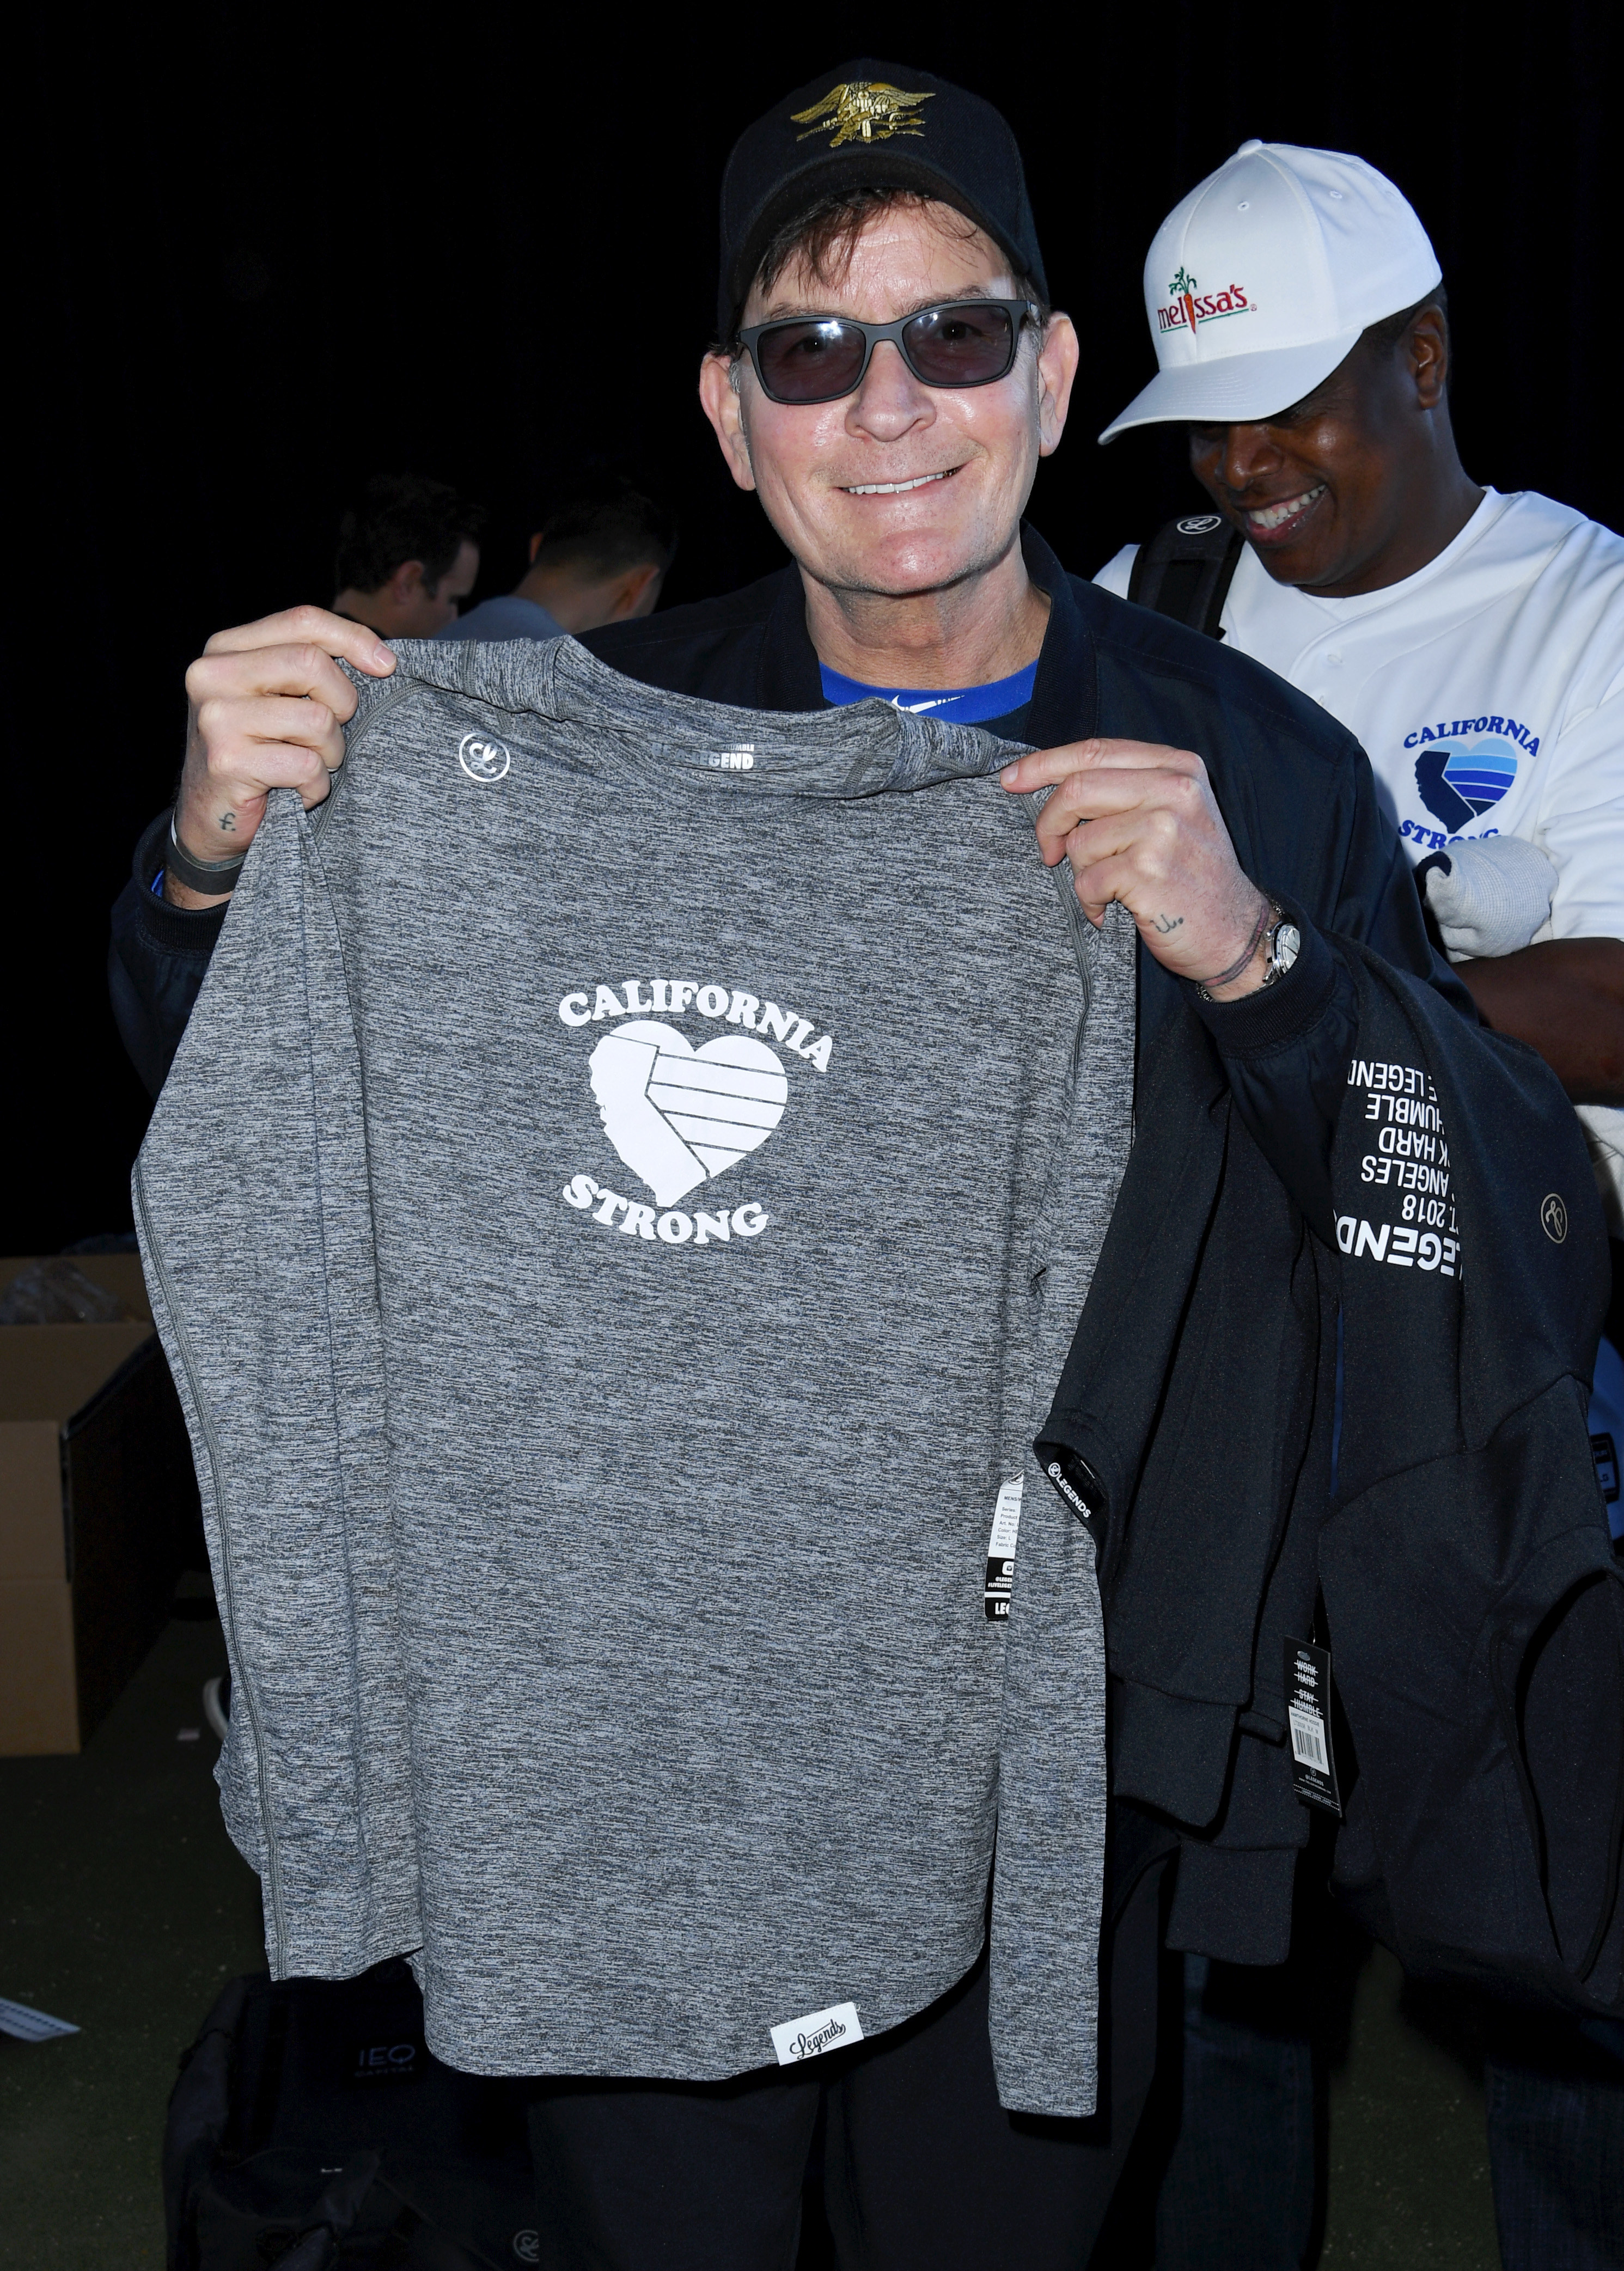 Charlie Sheen holding up a California Strong shirt and smiling